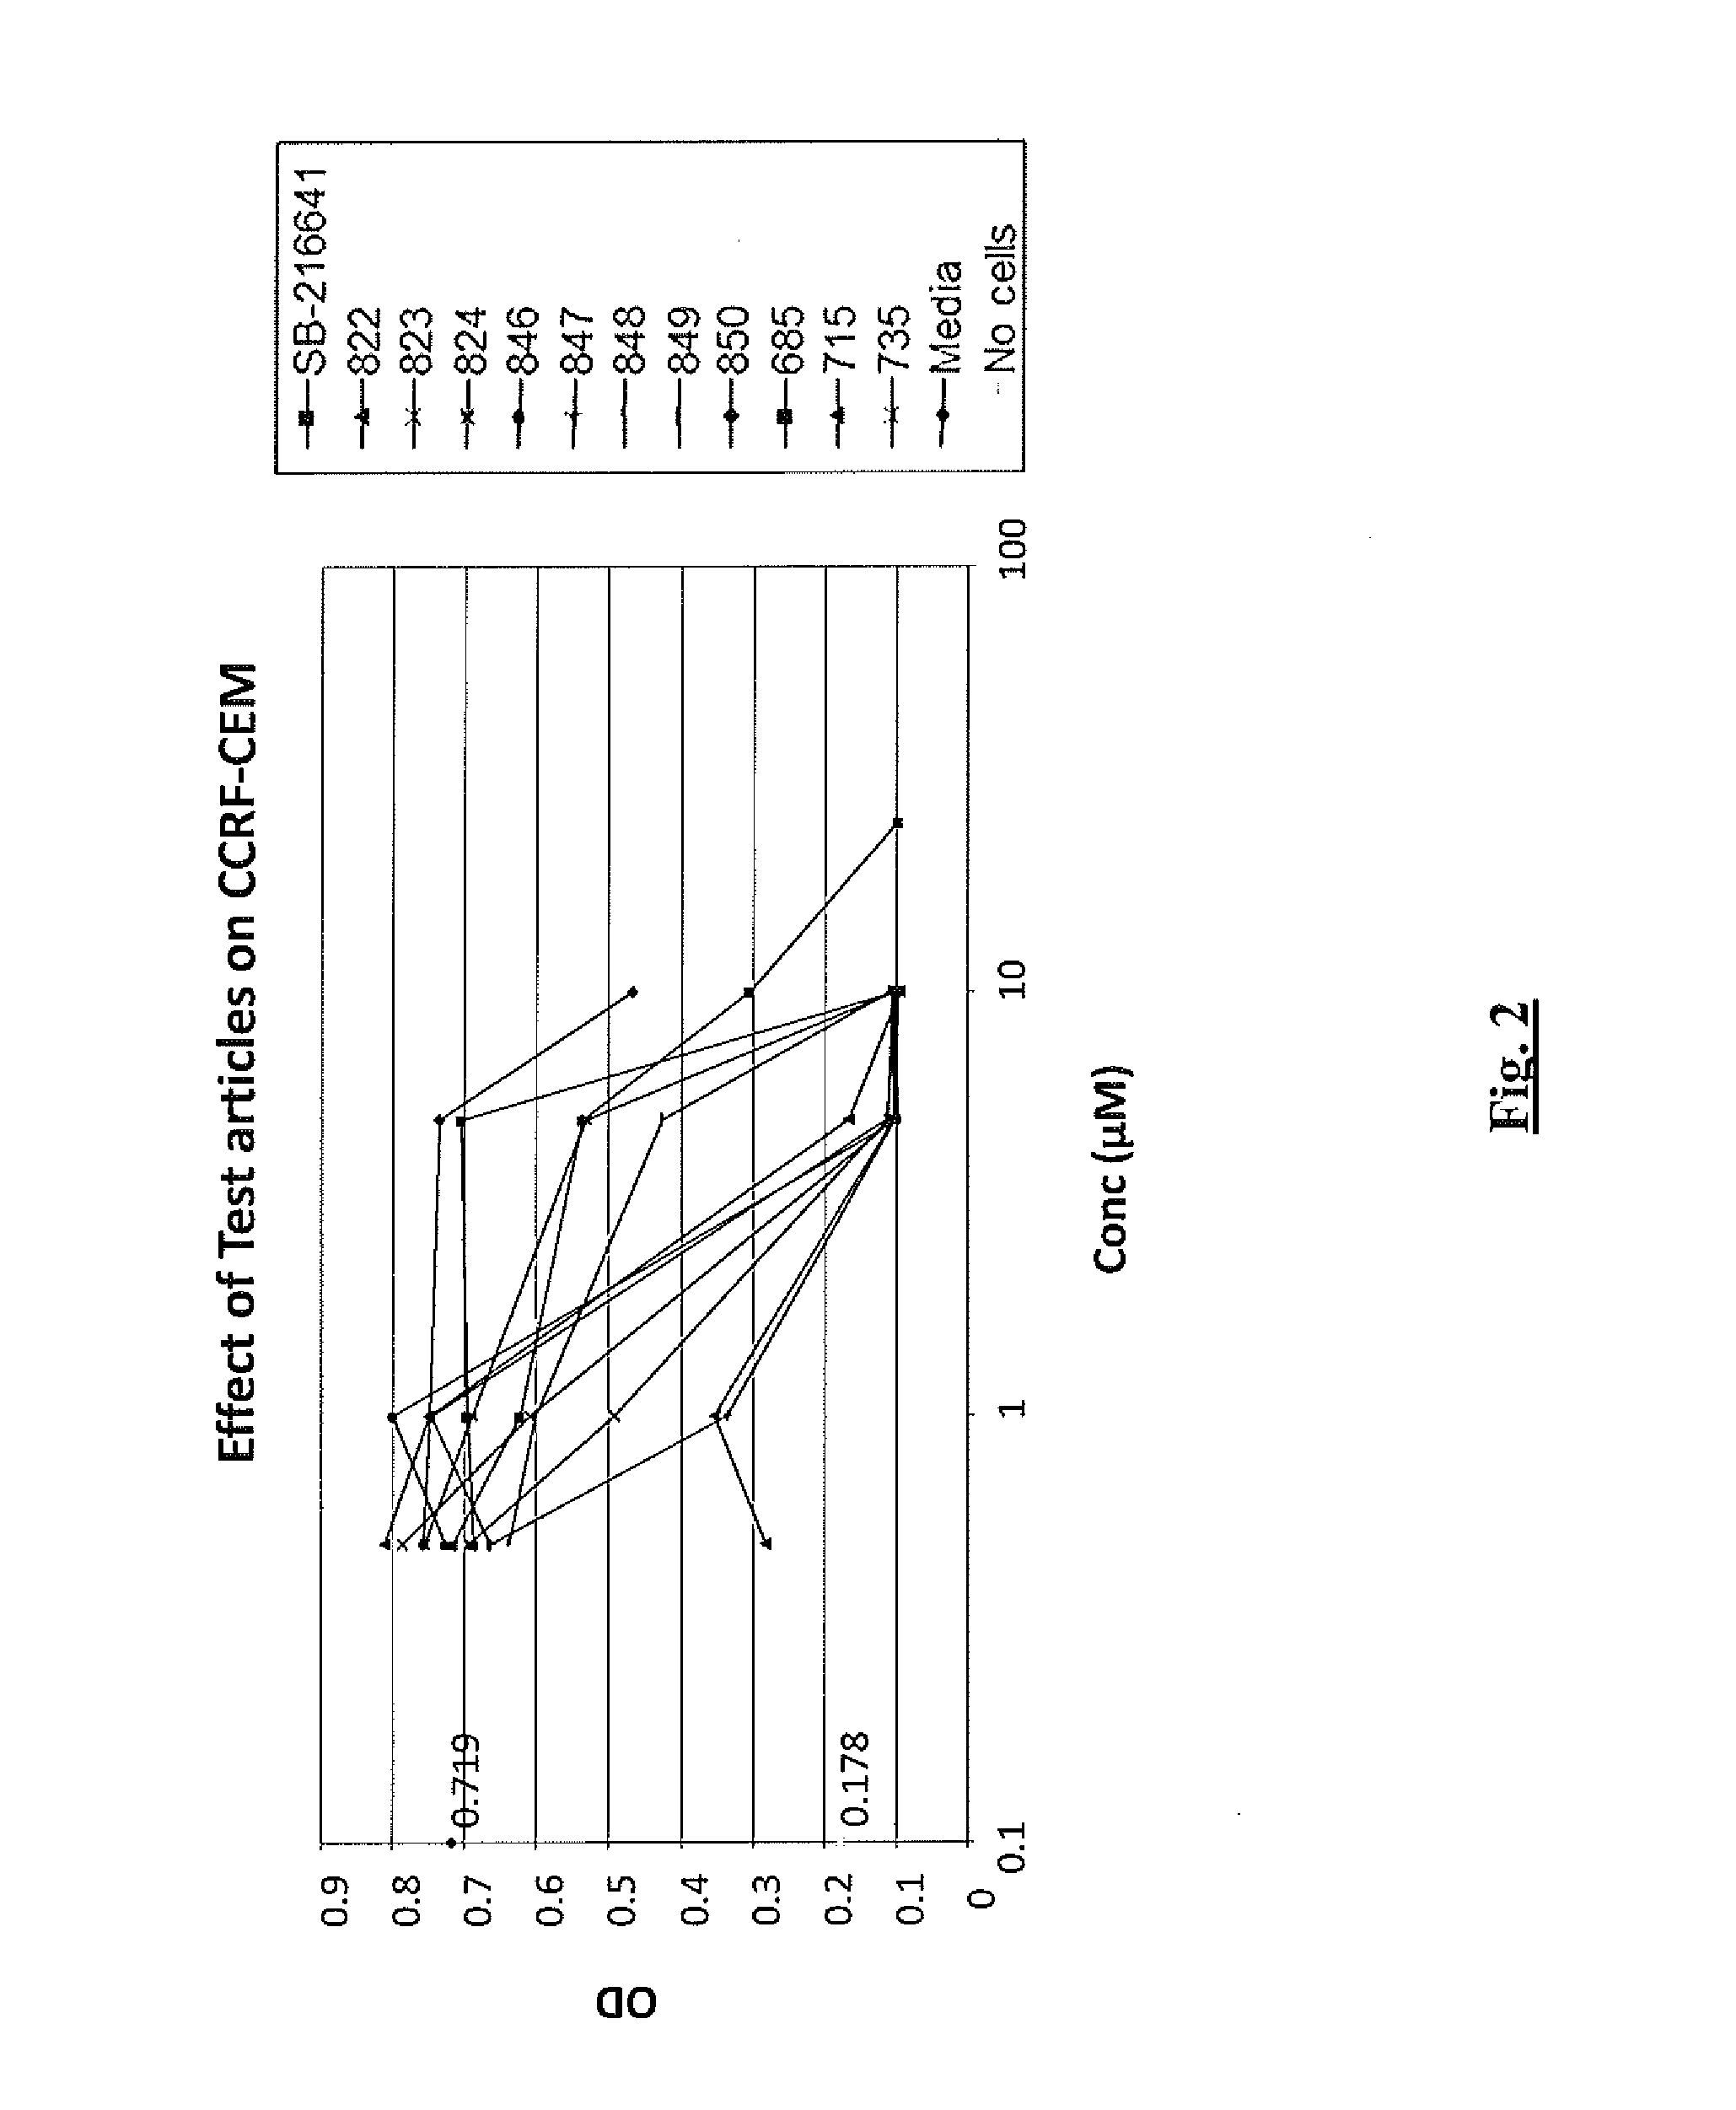 Novel Compositions and Methods of Treating Diseases Using the Same